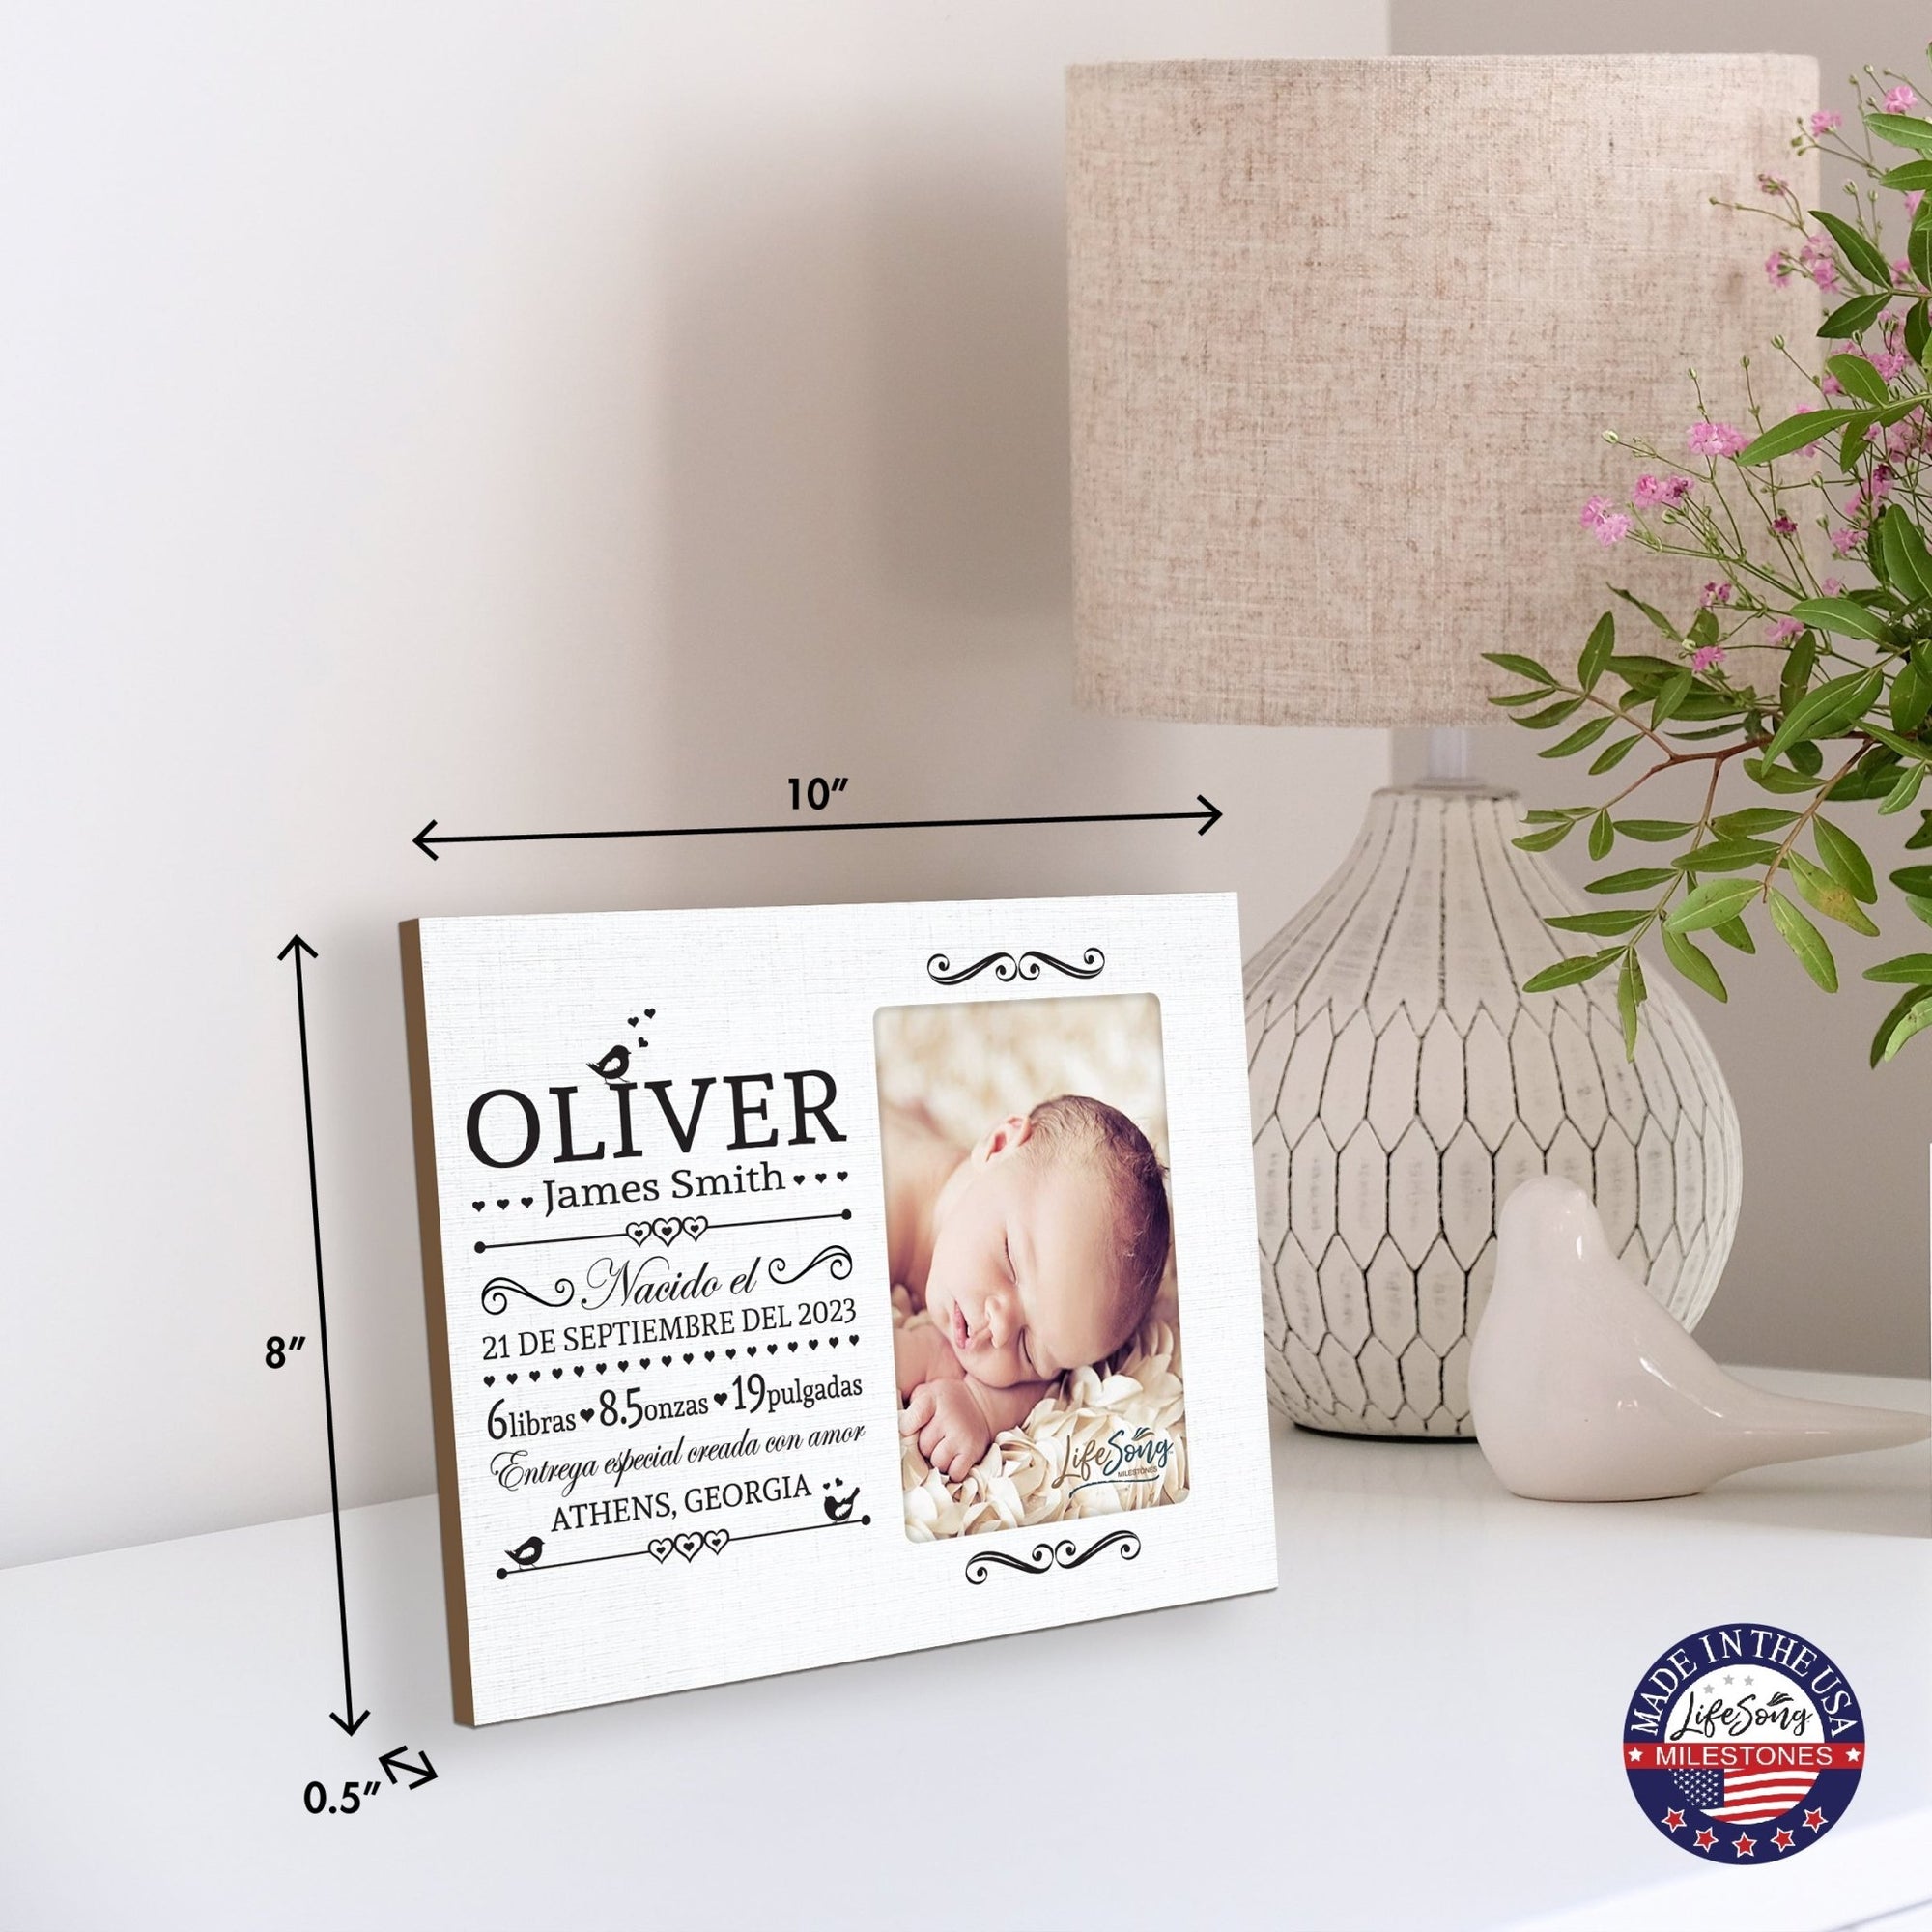 Newborn Baby Announcement Spanish Cutesy Wall And Tabletop Photo Frame For New Parents Gift Ideas - Entrego Especial Creada Con Amor - LifeSong Milestones